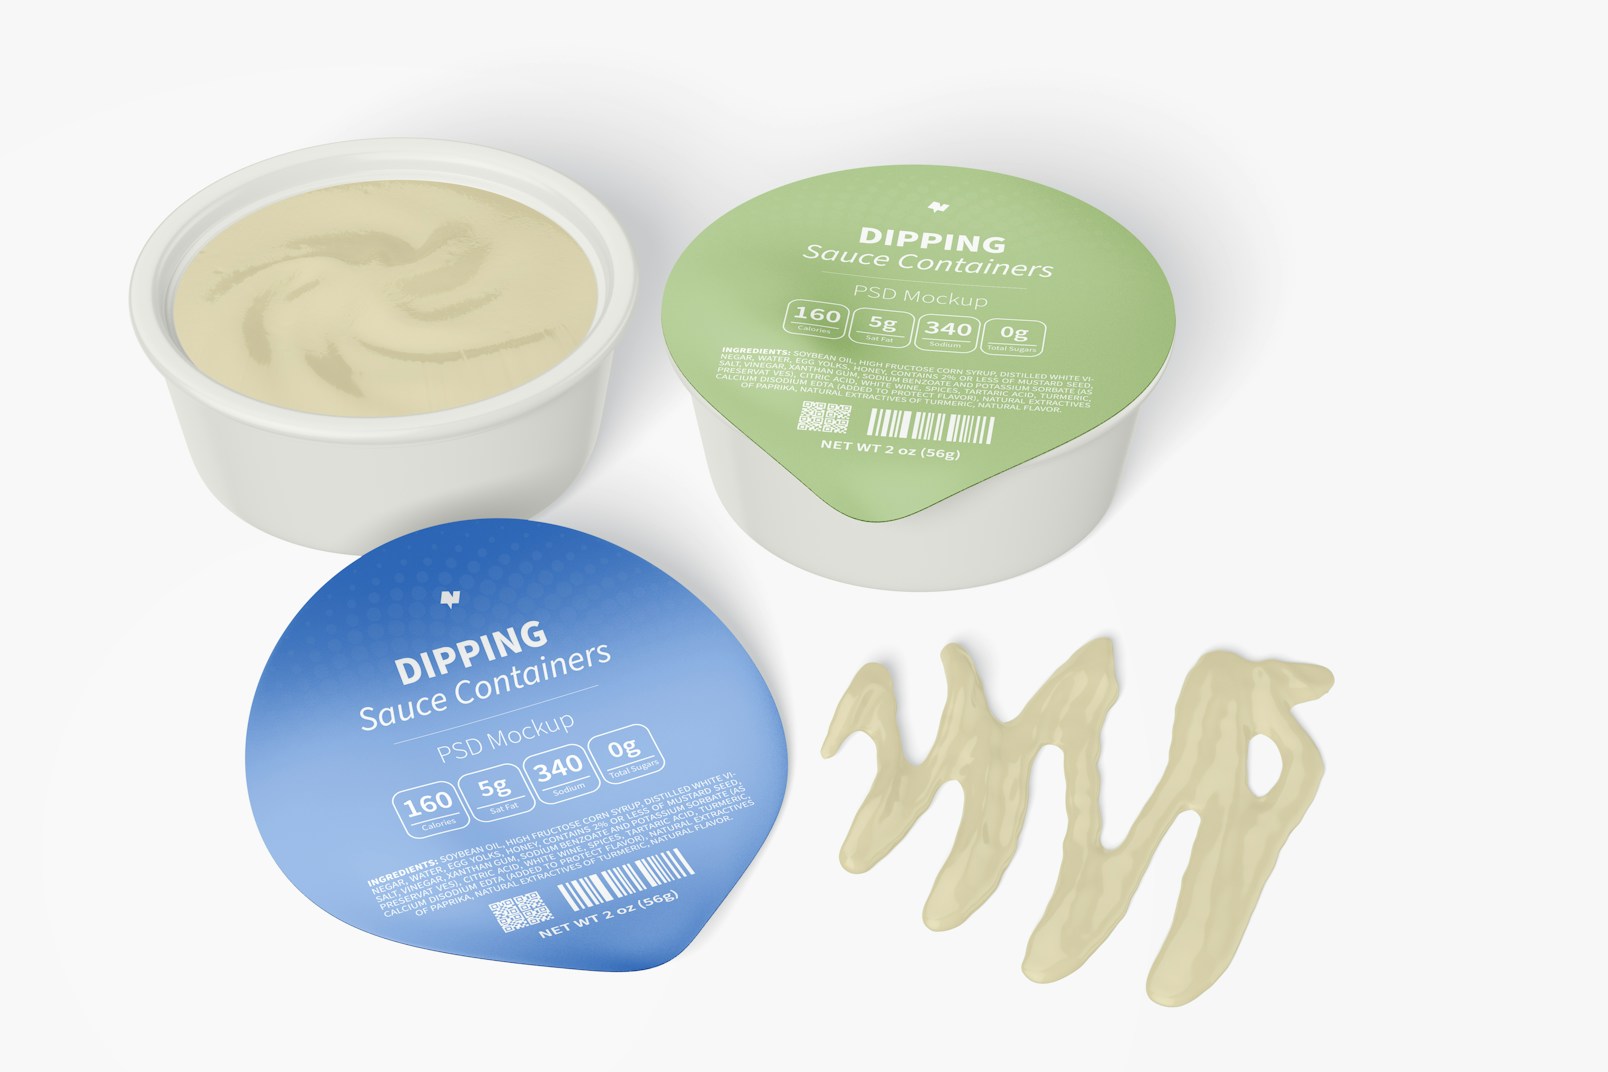 Dipping Sauce Containers Mockup, Opened and Closed